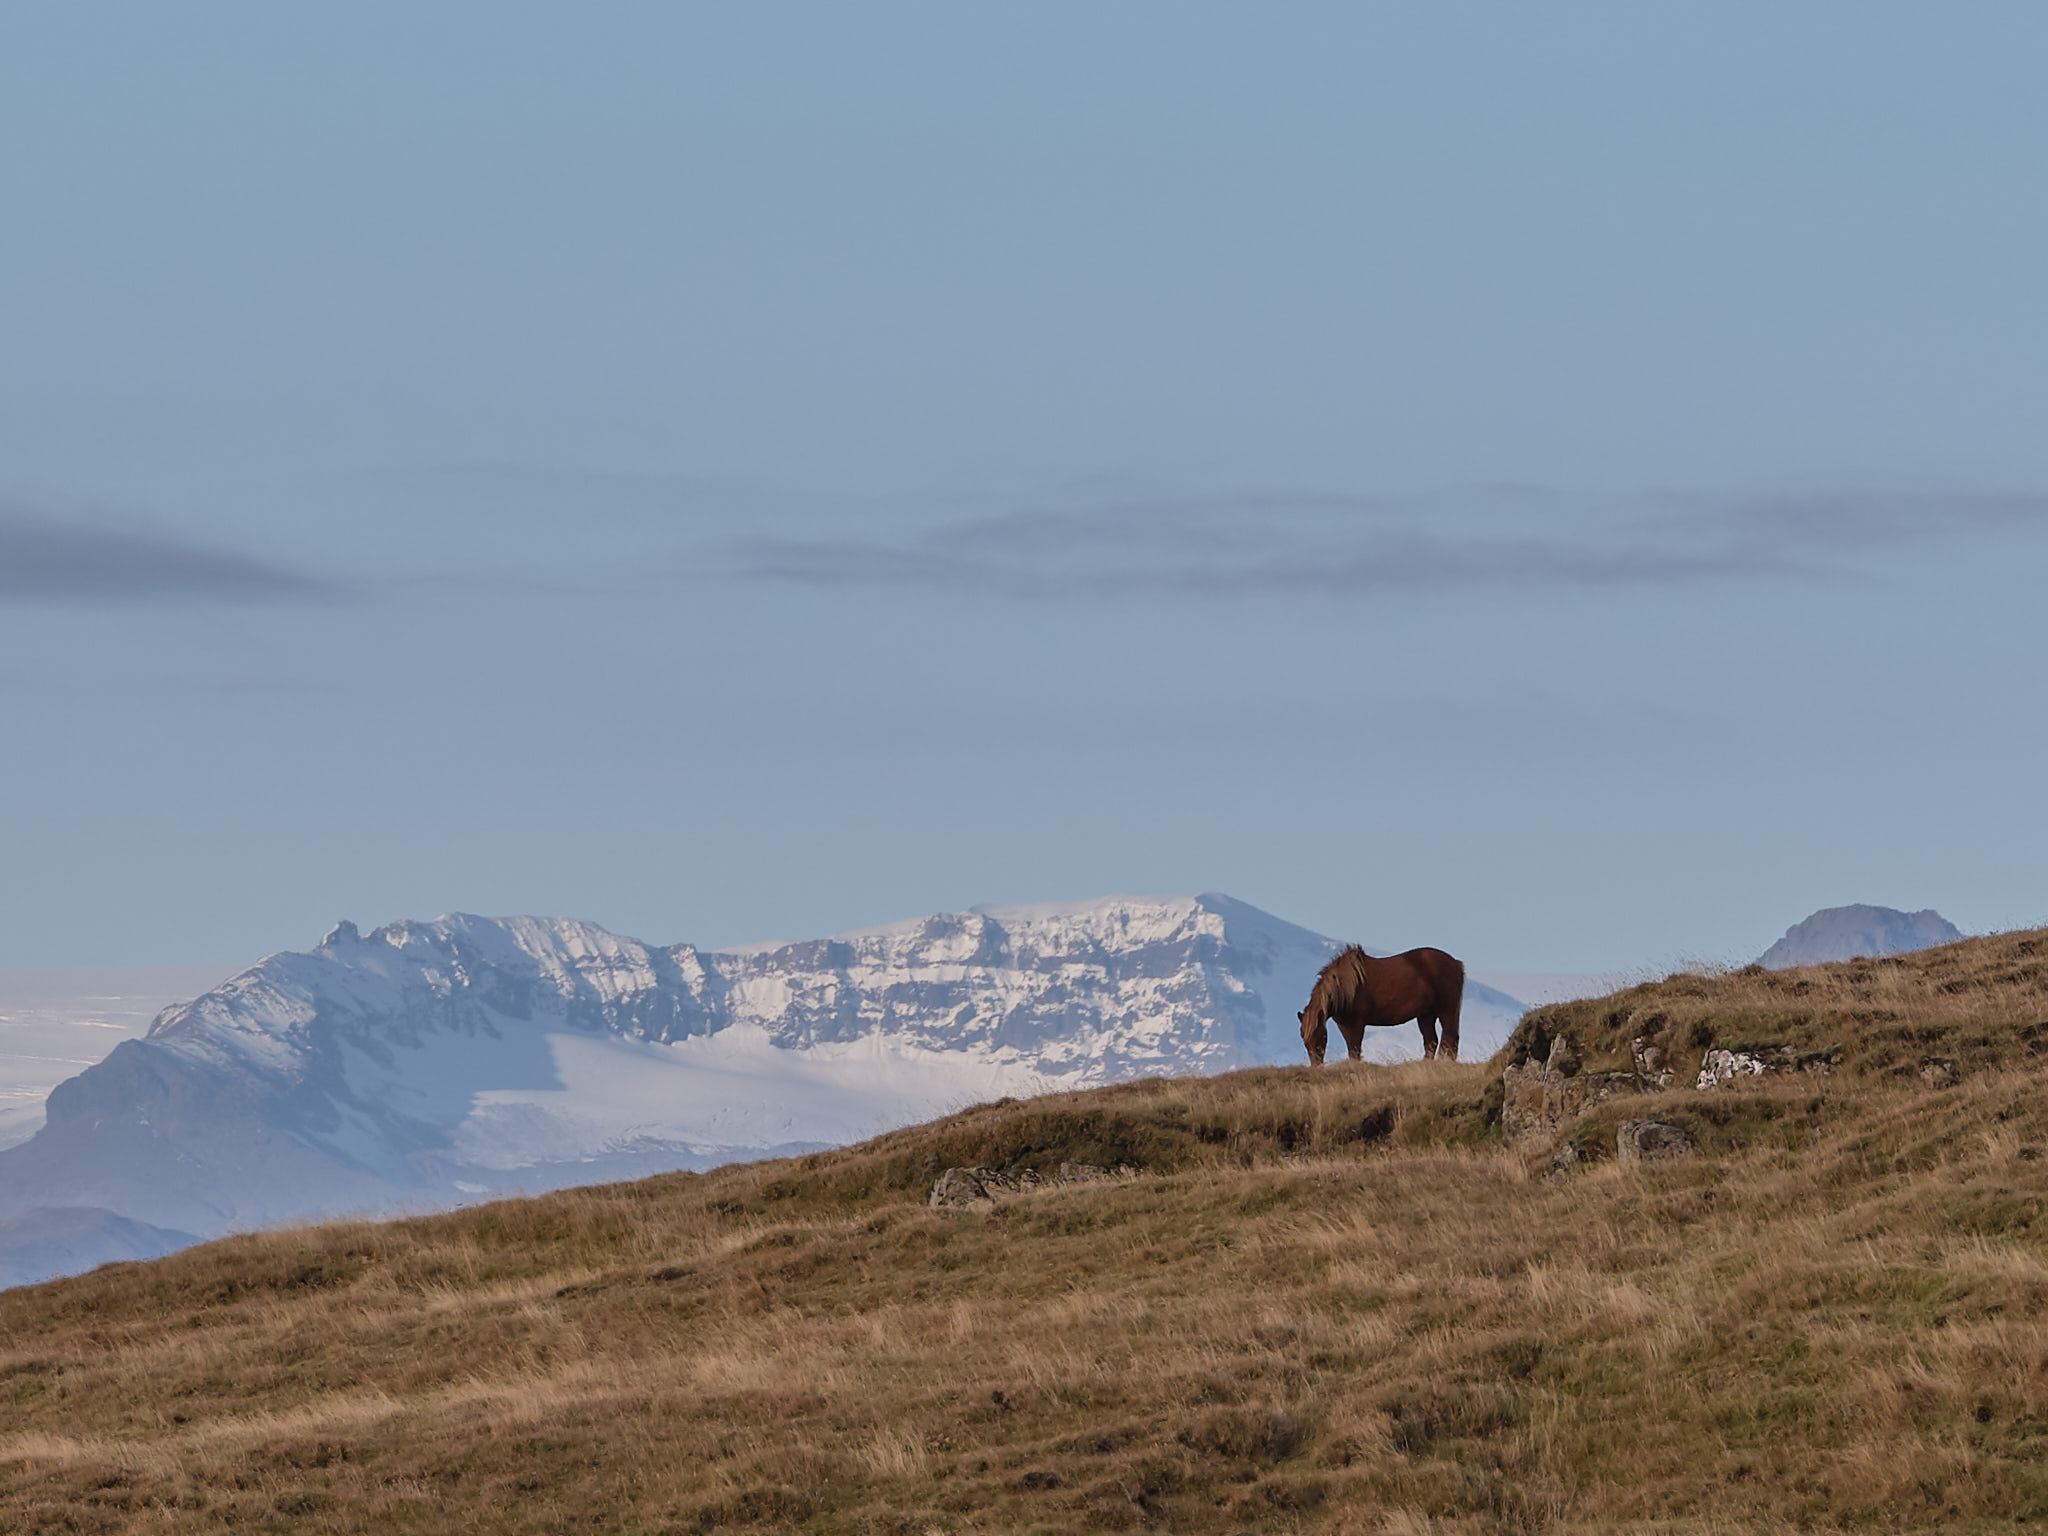 a horse grazing on a hill with snow covered mountains in the background